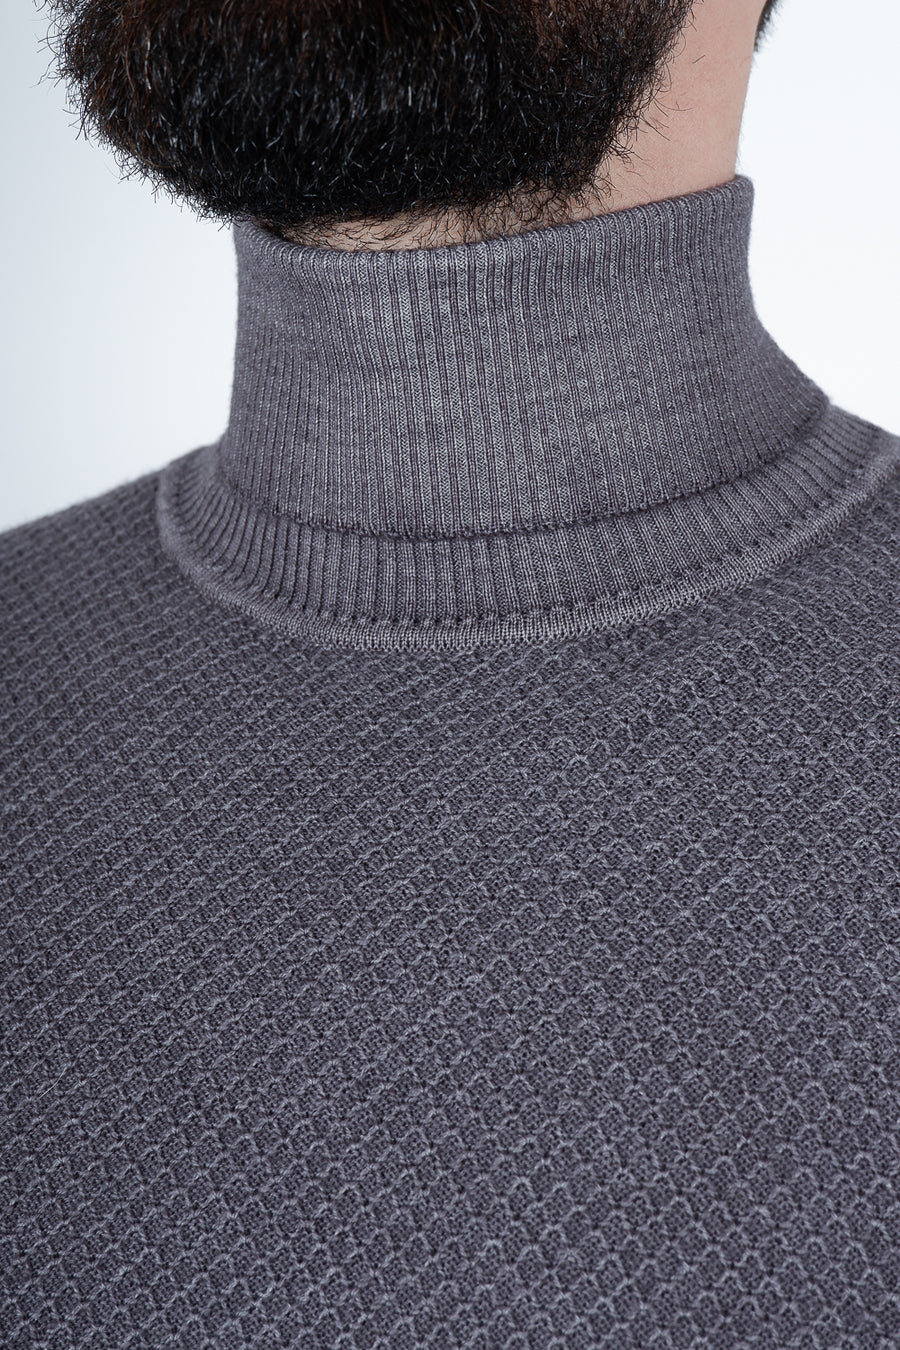 Buy the Daniele Fiesoli Ribbed Effect Turtle Neck Grey at Intro. Spend £50 for free UK delivery. Official stockists. We ship worldwide.